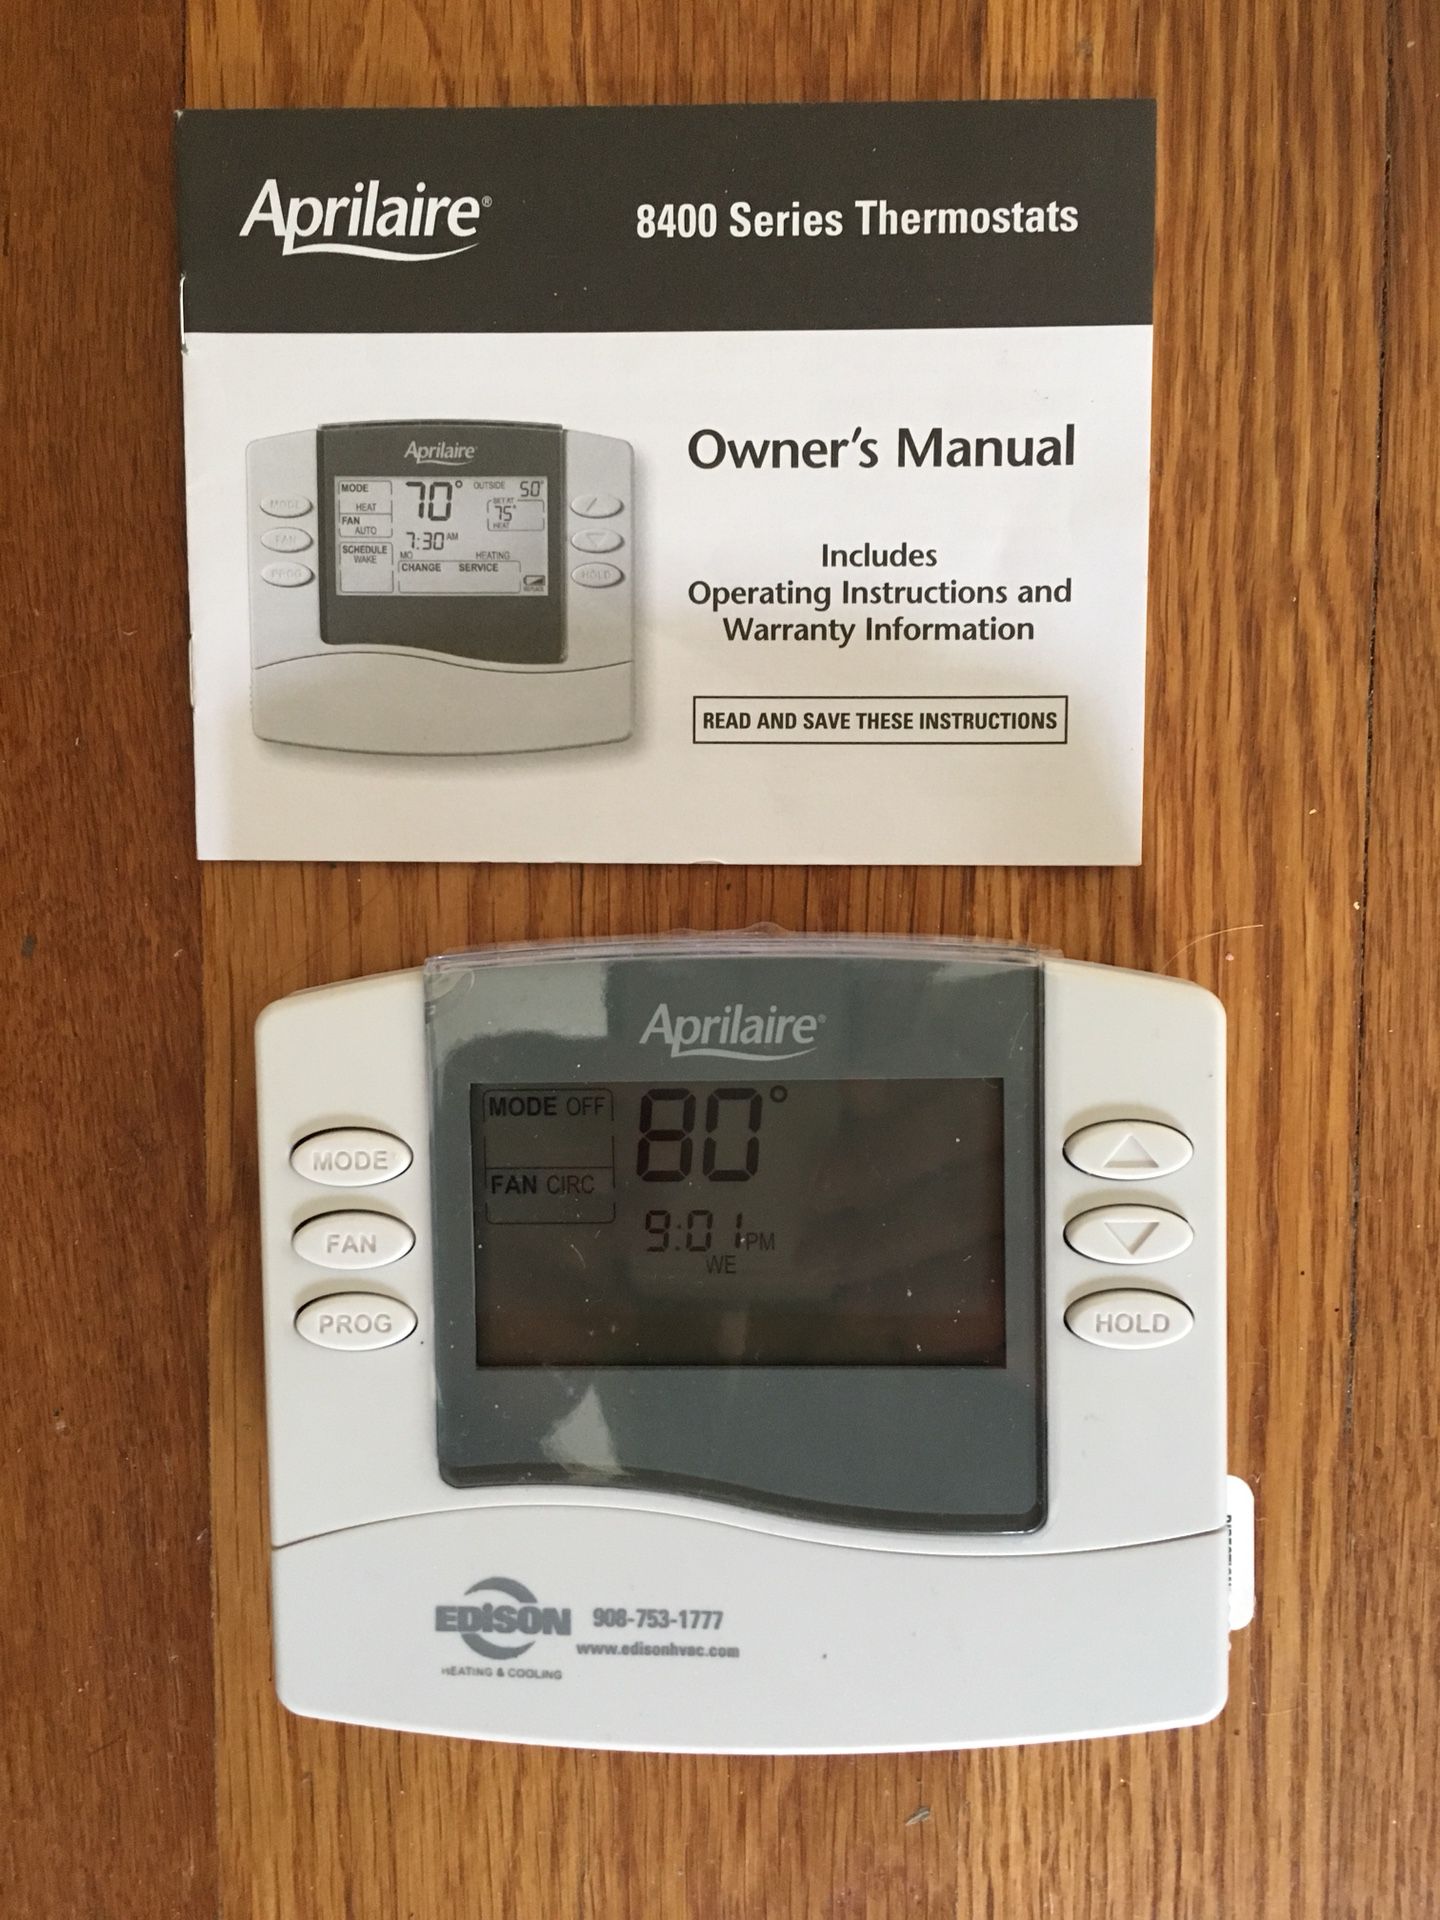 Aprilaire 8400 Series Thermostat